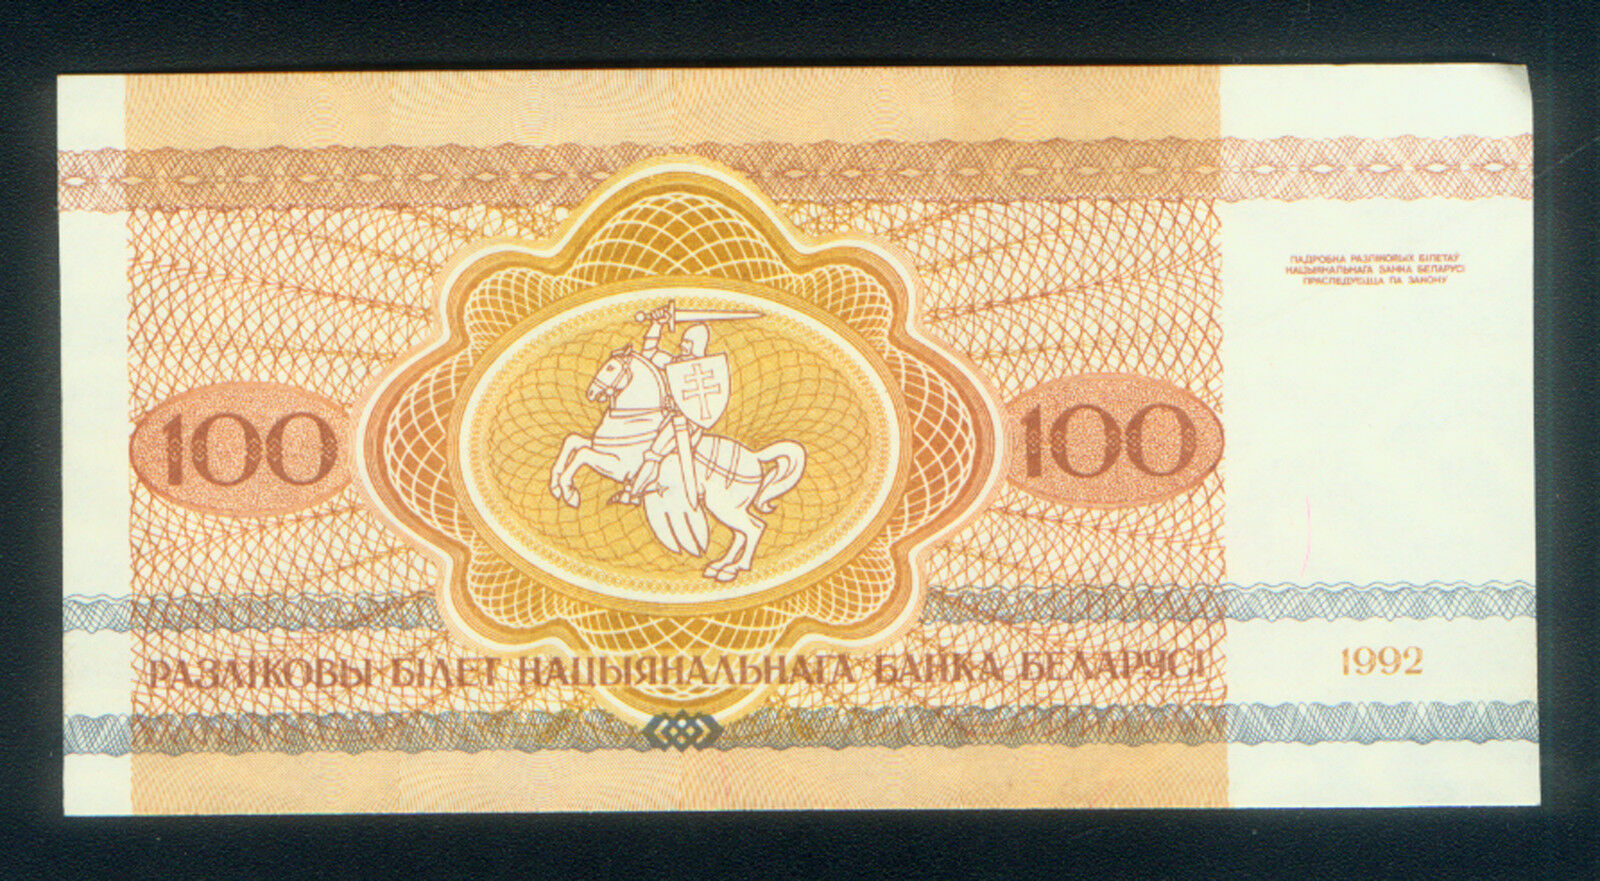 WHOLESALE - BRICK of 1000 BELARUS 100 R NOTES of 1992 with BISON PICK # 8 UNC